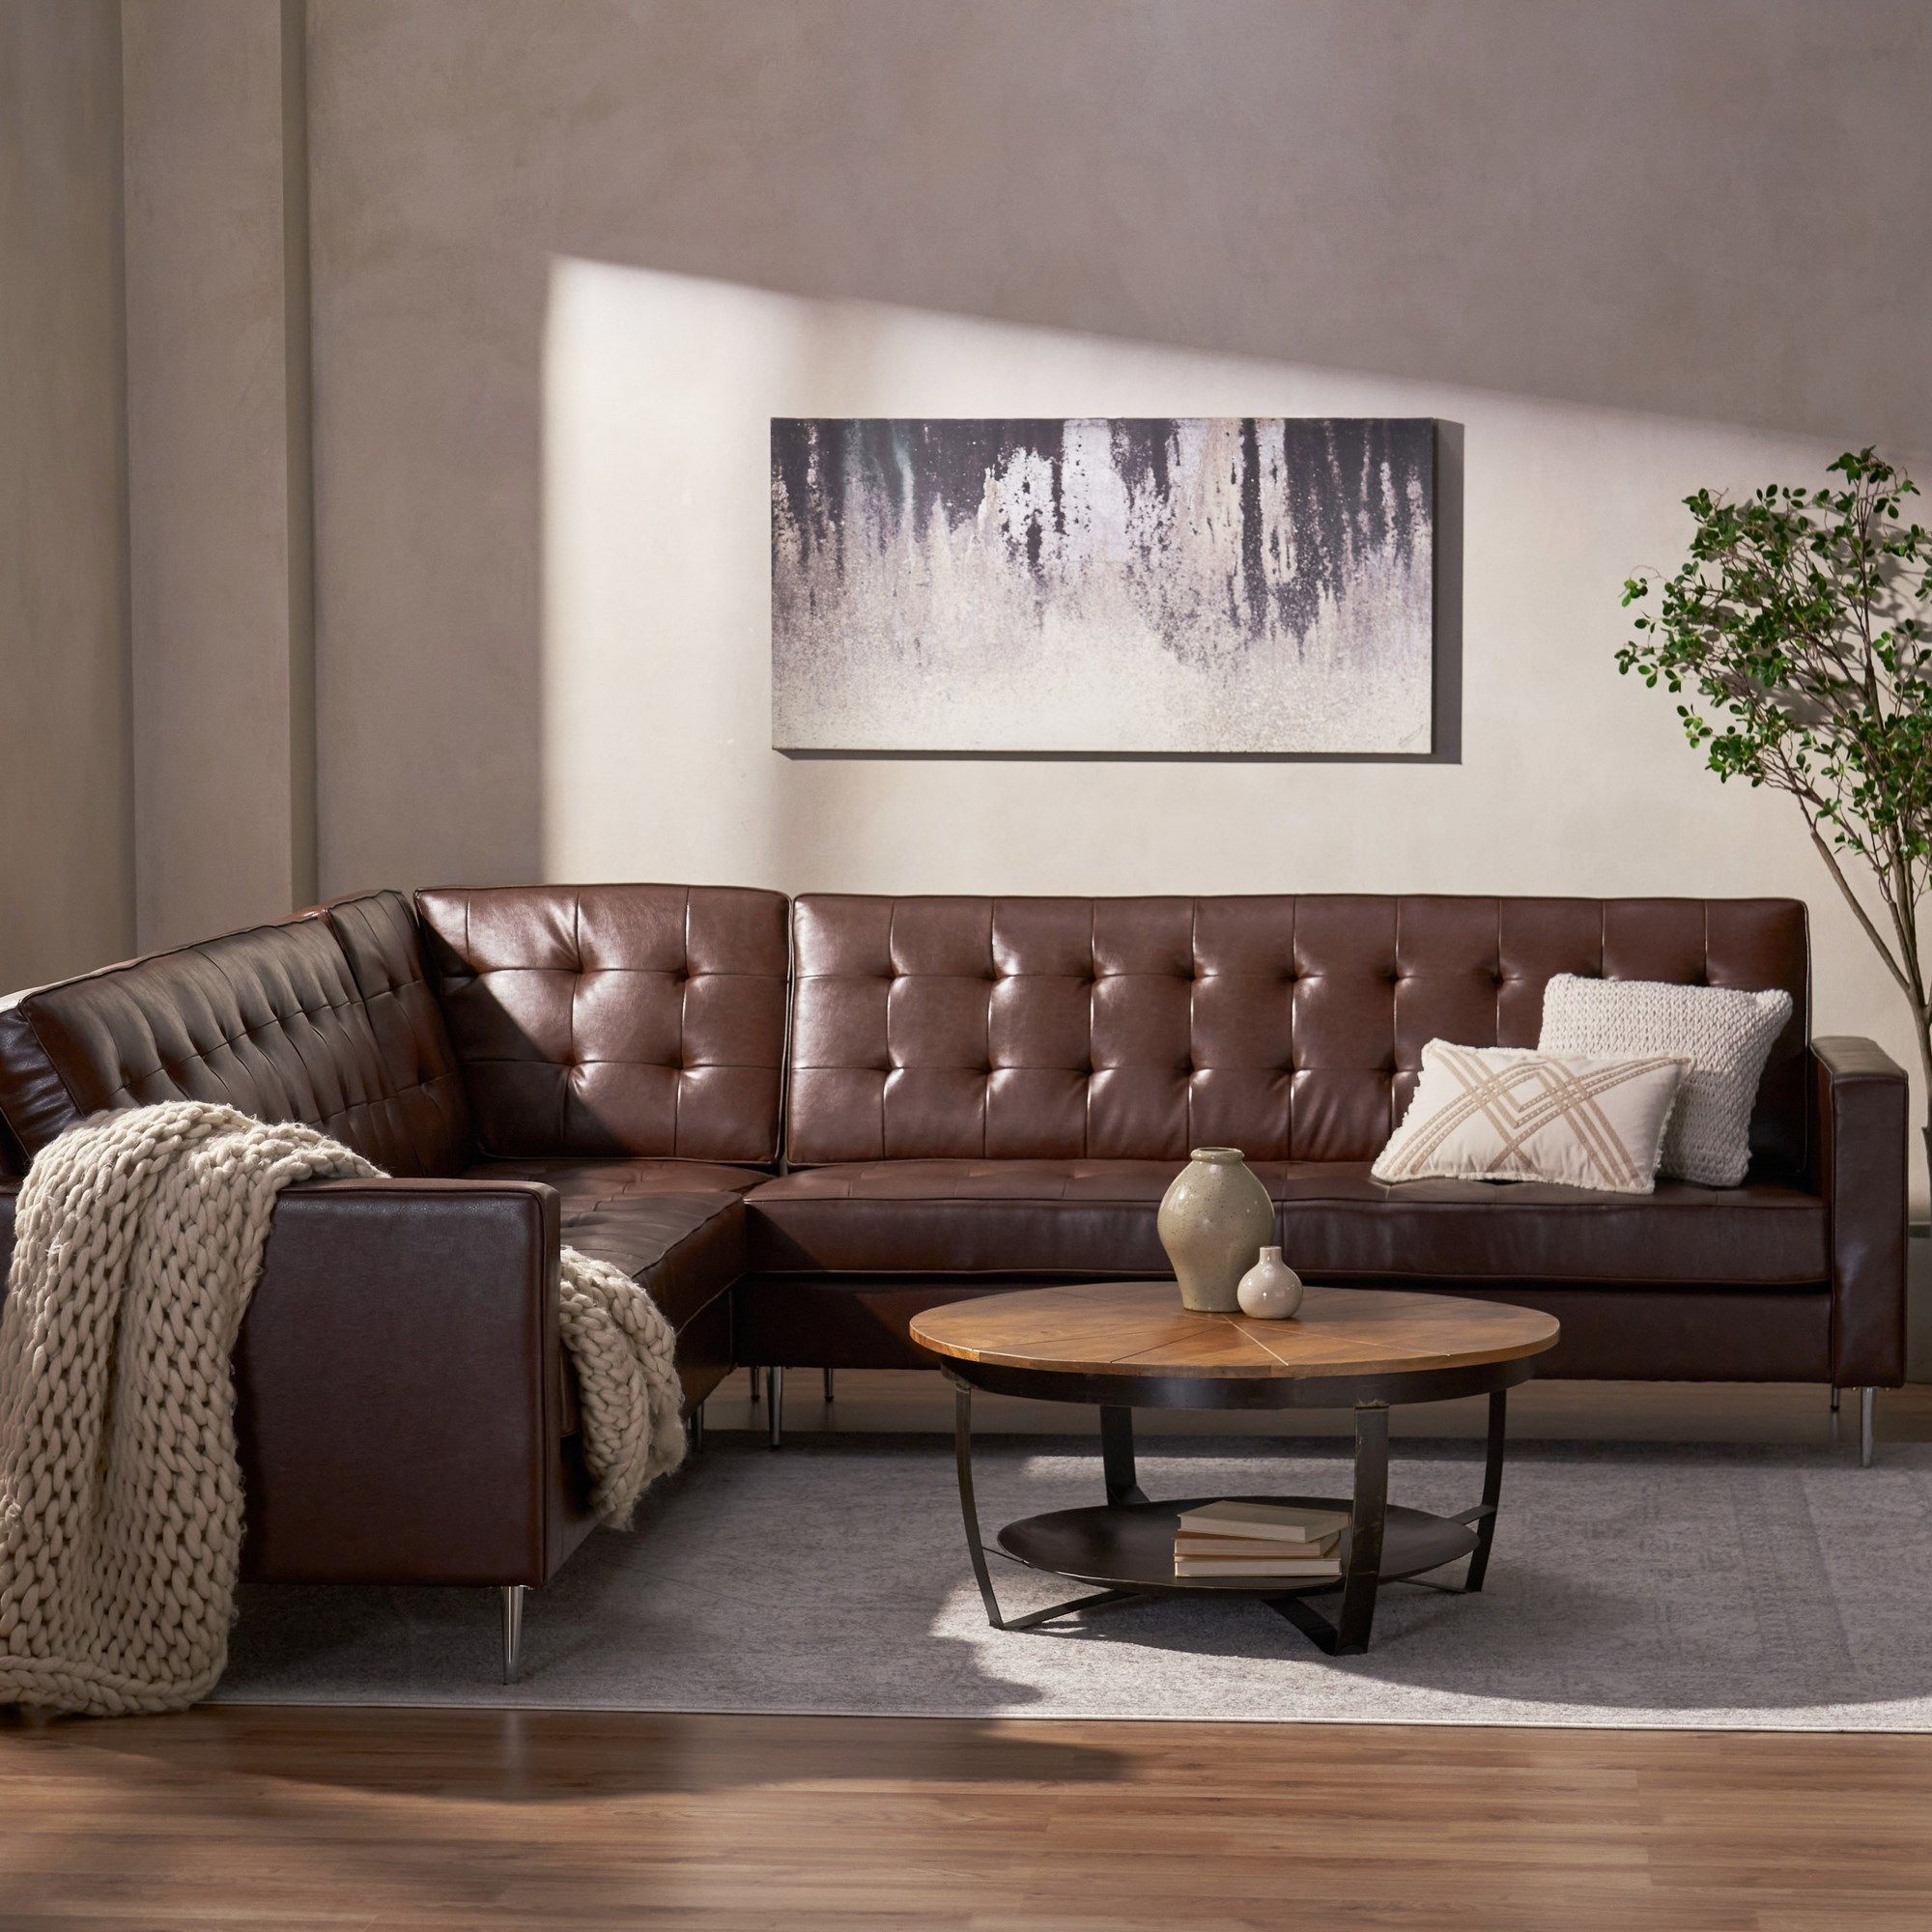 Gebo Contemporary Faux Leather Tufted 5 Seater Sectional Sofa Set, Dark  Brown And Chrome Inside Faux Leather Sectional Sofa Sets (Photo 4 of 15)